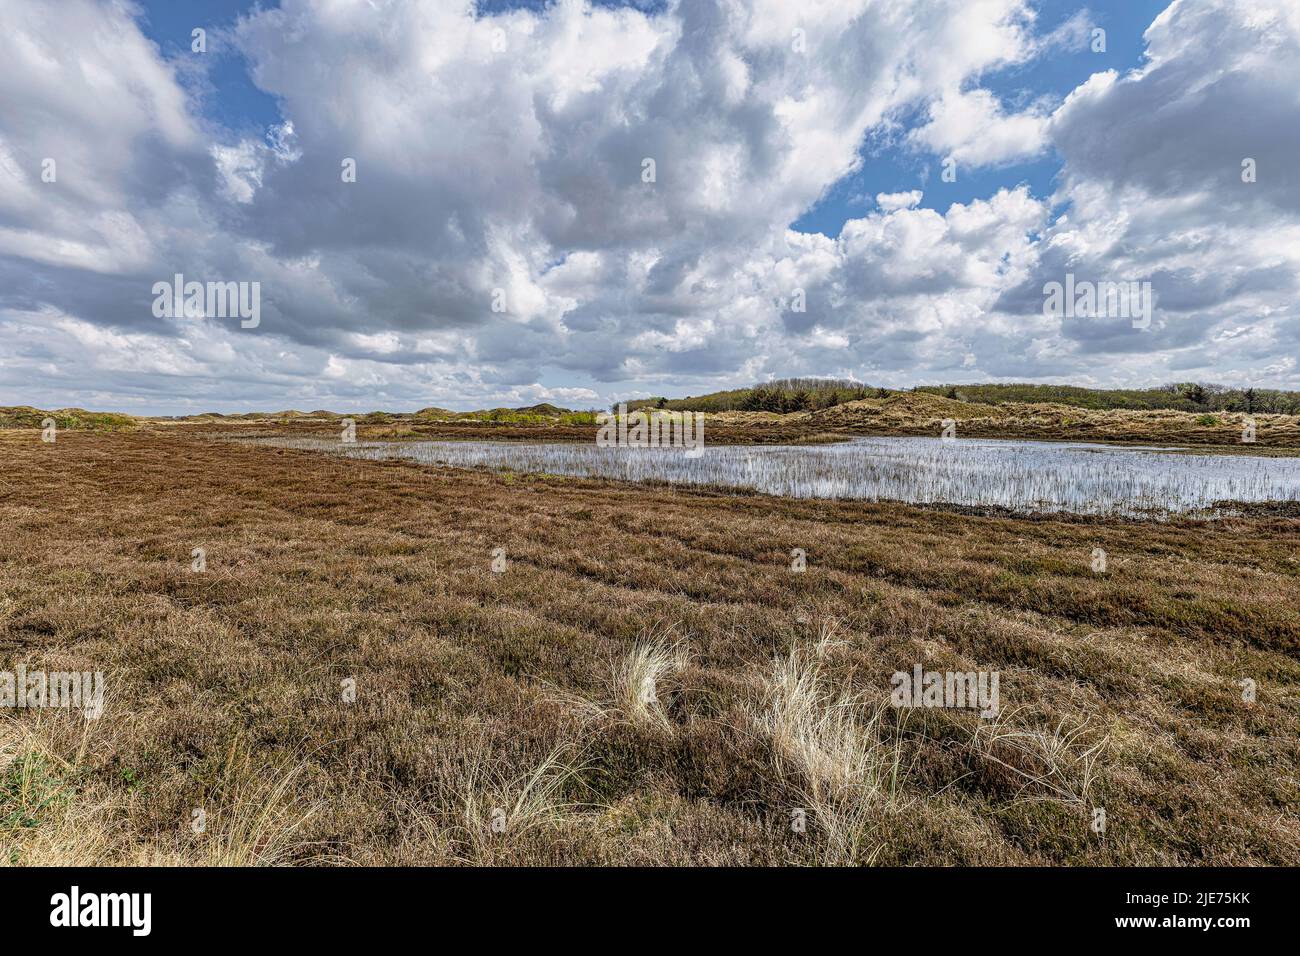 View on a dune landscape, national park The Slufter on the island of Texel, Netherlands Stock Photo